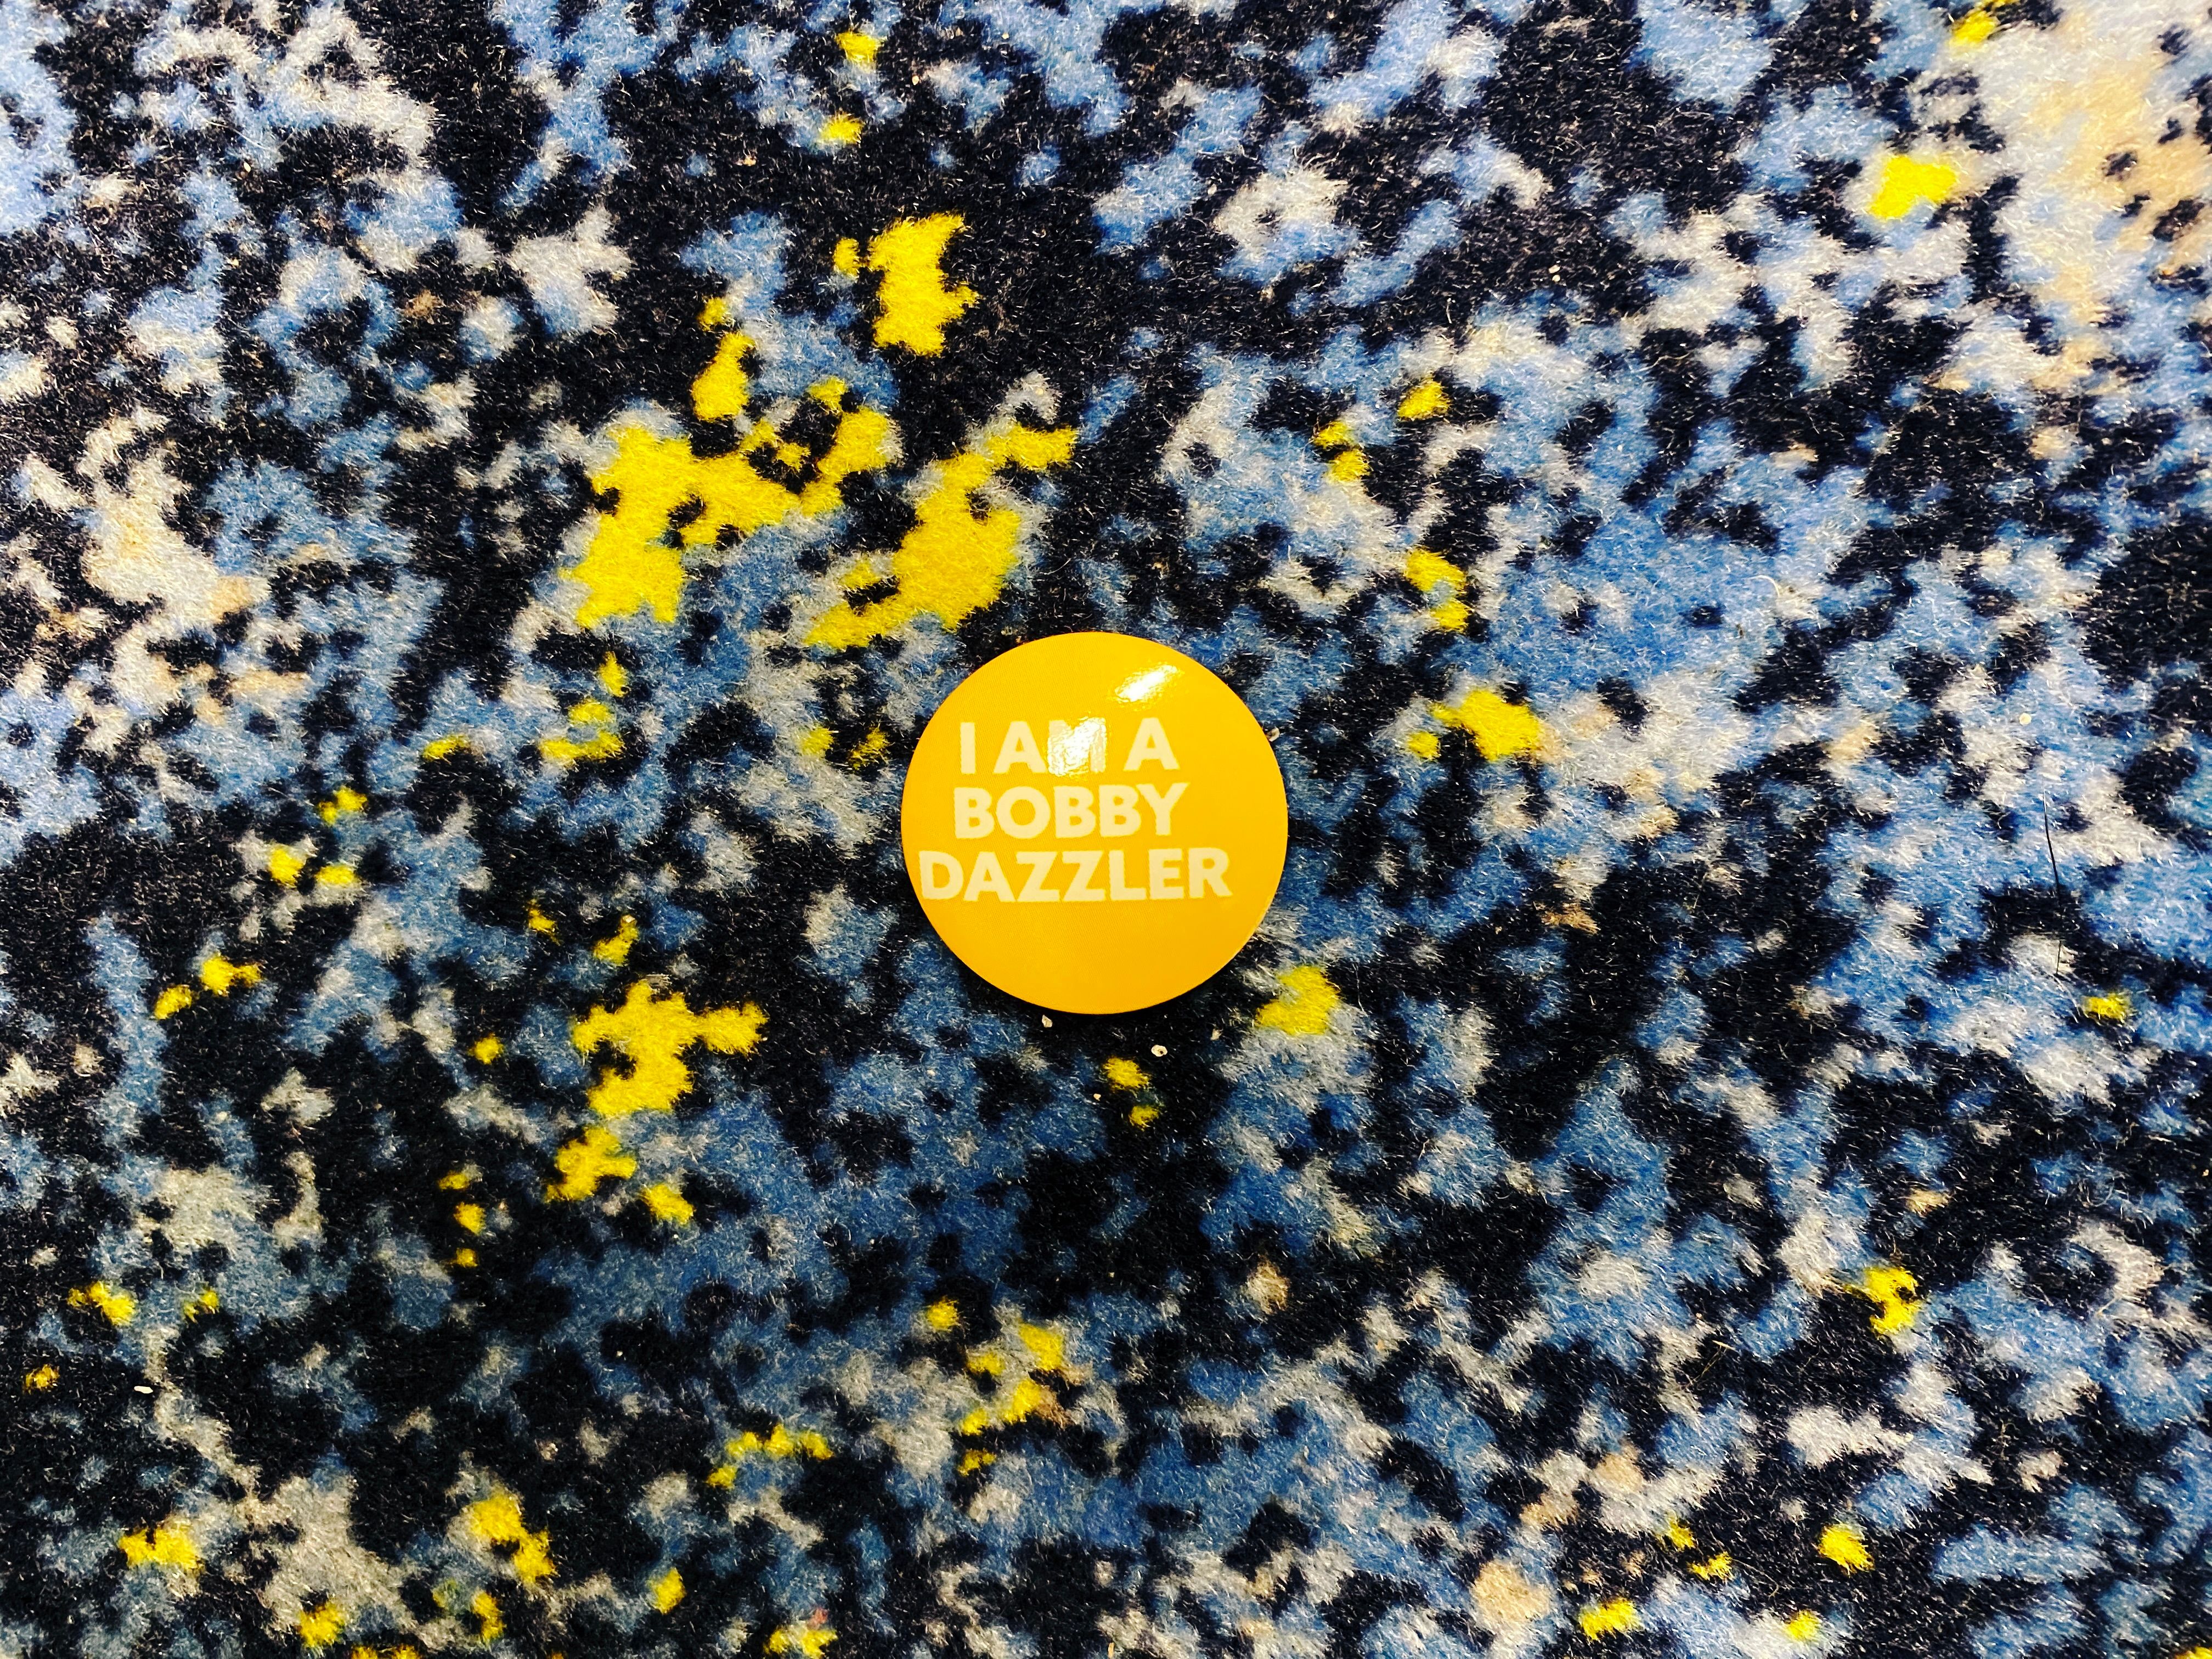 A photo of a small round yellow pin, the sort you'd attach to a lapel or similar that says "I am a Bobby Dazzler" on it.